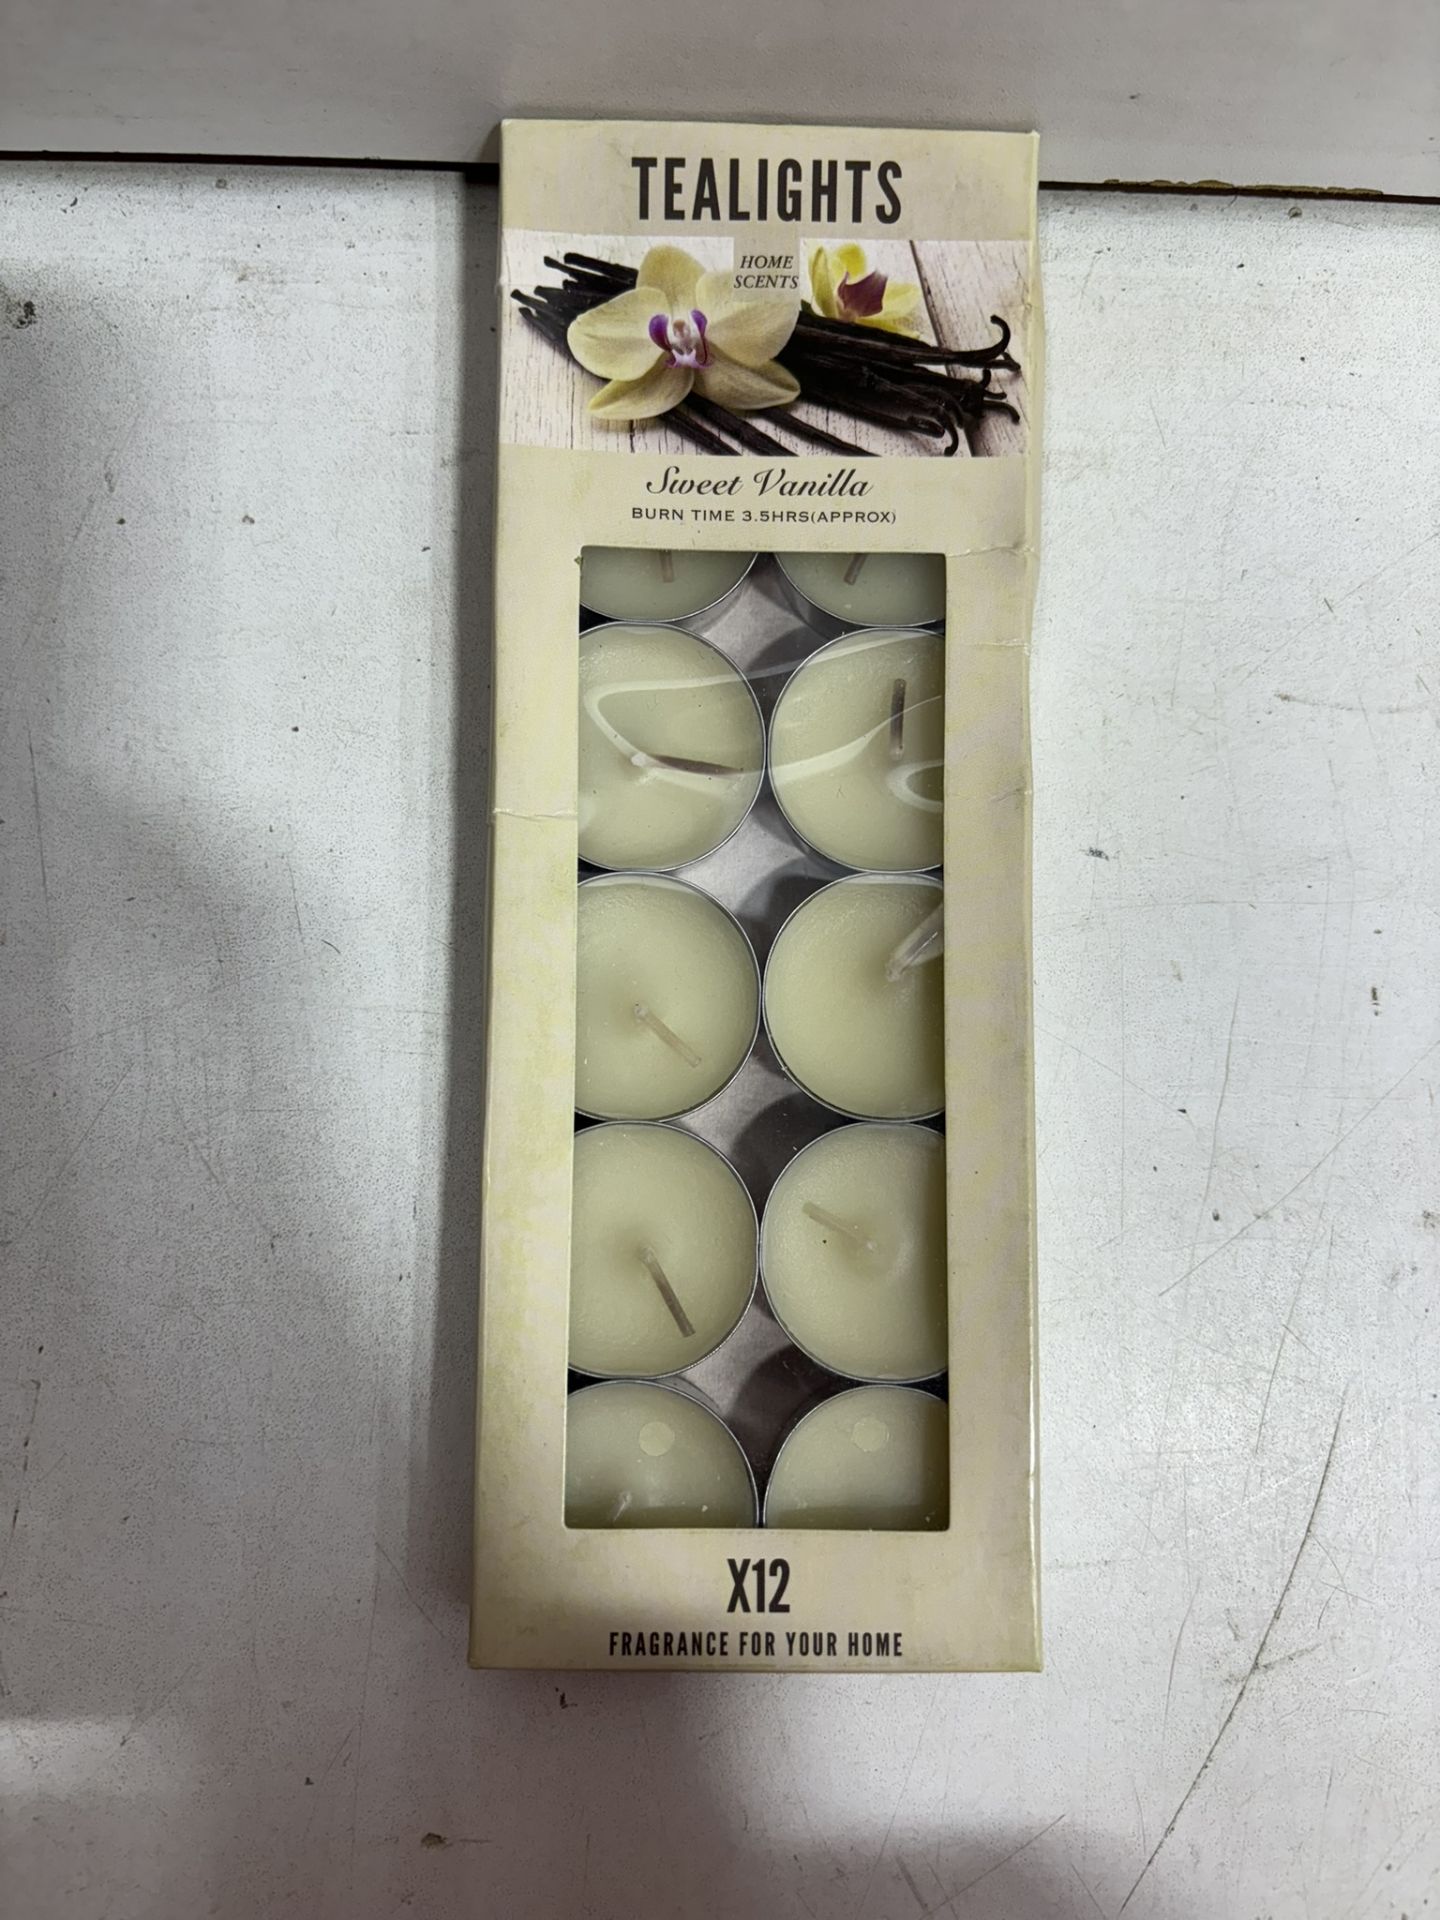 70 x Packs Of Various Scented Home Scents Tea Lights (12 Per Pack) - Image 2 of 3